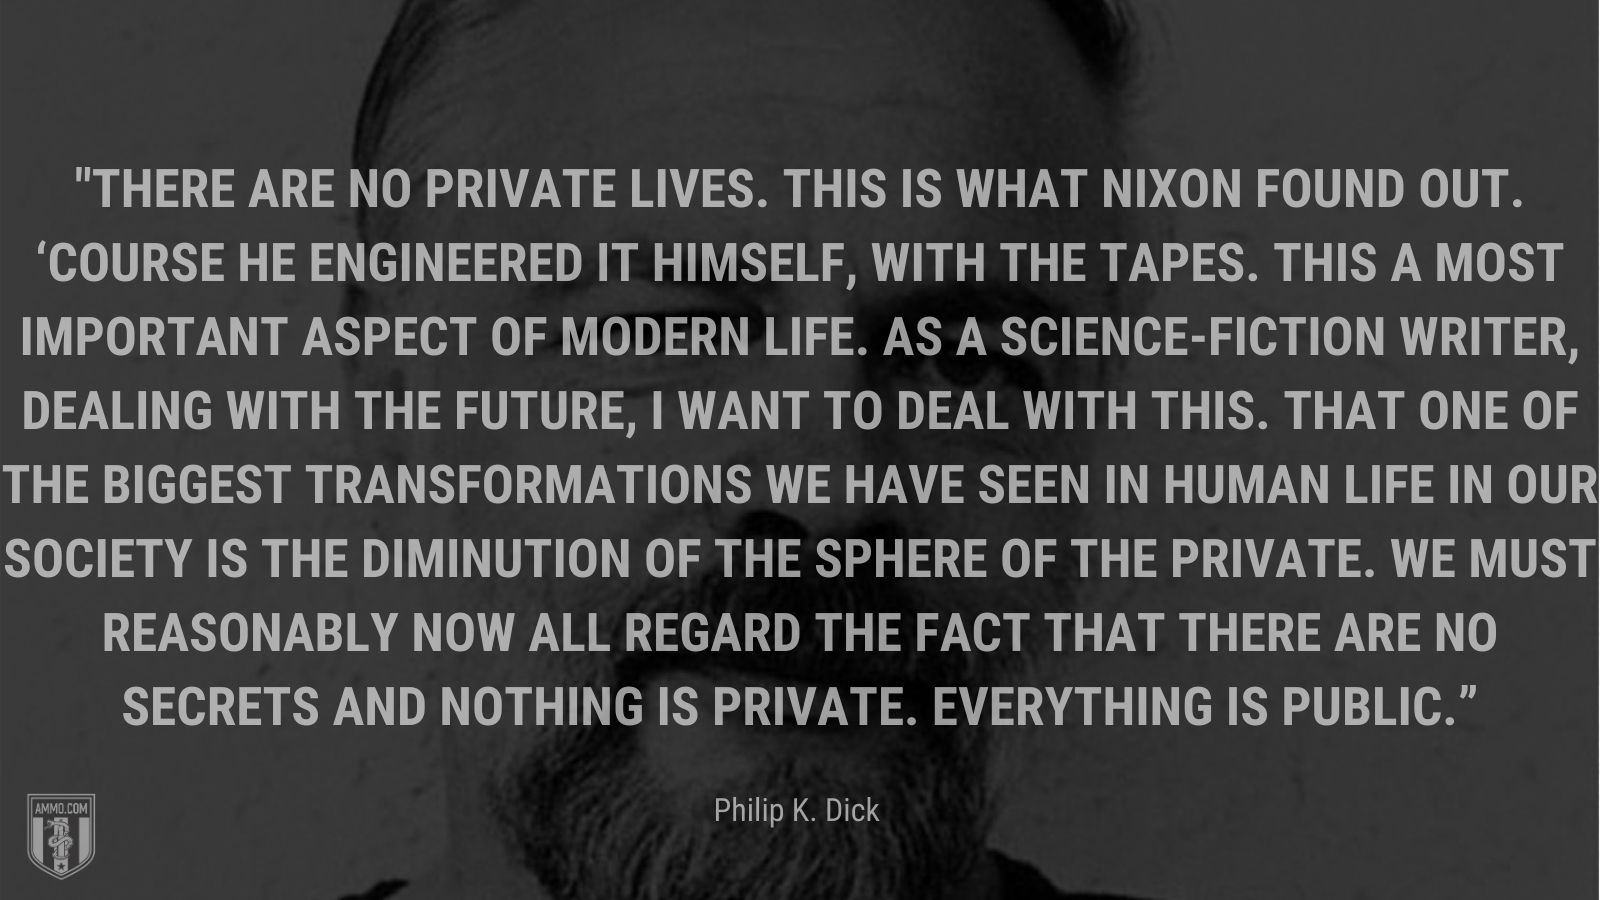 “There are no private lives. This is what Nixon found out. ‘Course he engineered it himself, with the tapes. This a most important aspect of modern life. As a science-fiction writer, dealing with the future, I want to deal with this. That one of the biggest transformations we have seen in human life in our society is the diminution of the sphere of the private. We must reasonably now all regard the fact that there are no secrets and nothing is private. Everything is public.” - Philip K. Dick